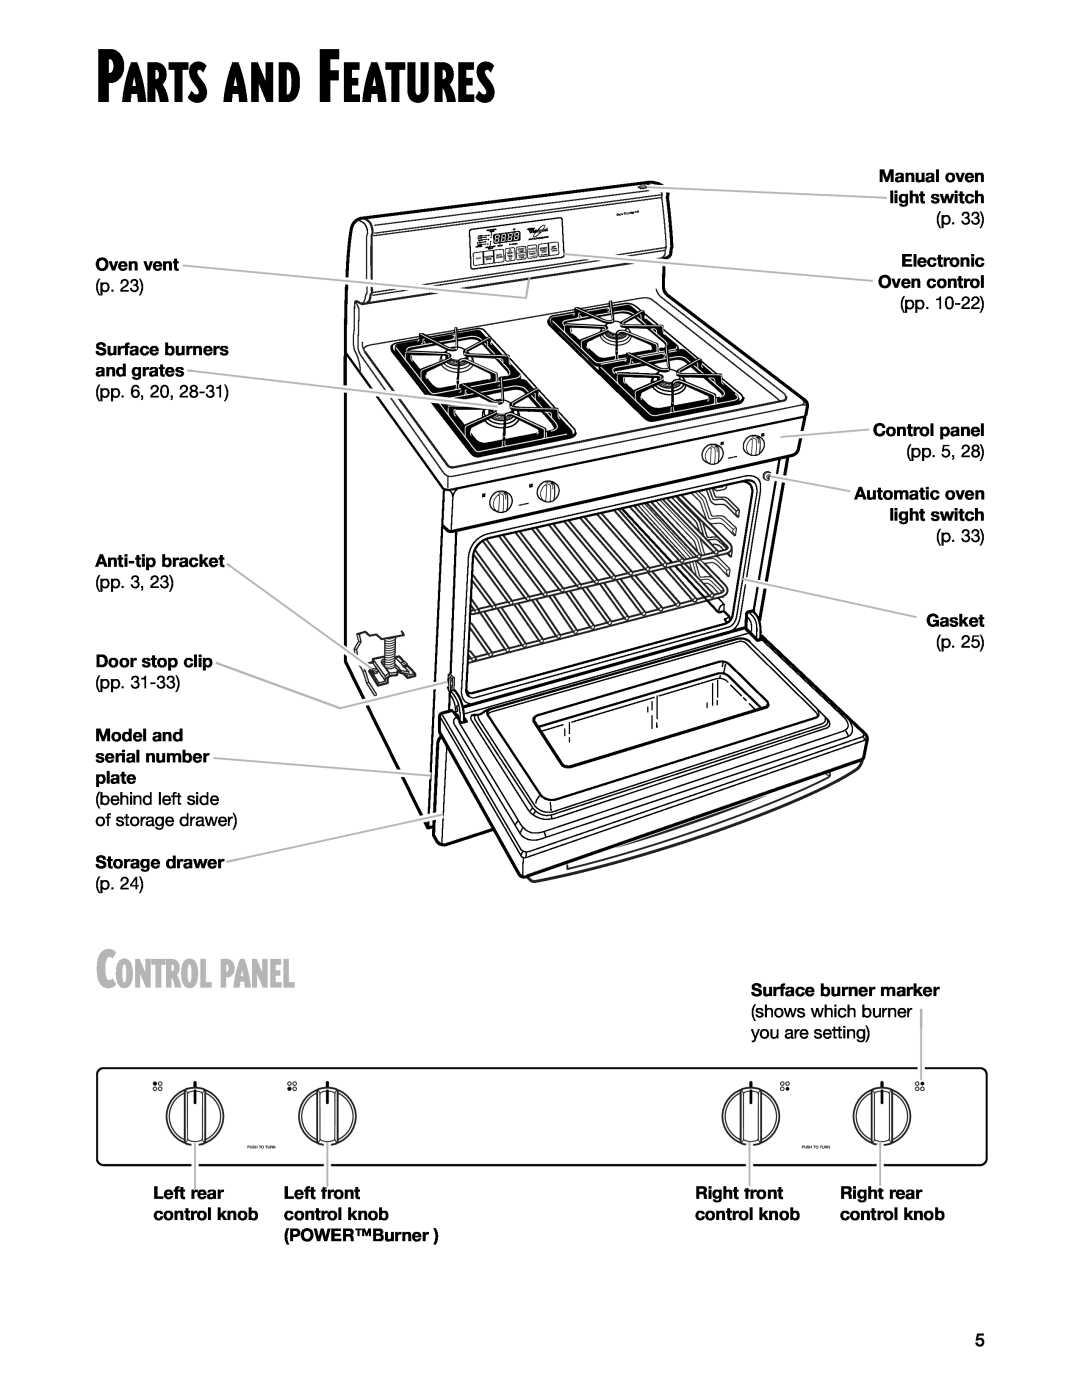 Whirlpool SF377PEG Parts And Features, Control Panel, Manual oven light switch, Oven vent, Door stop clip, Storage drawer 